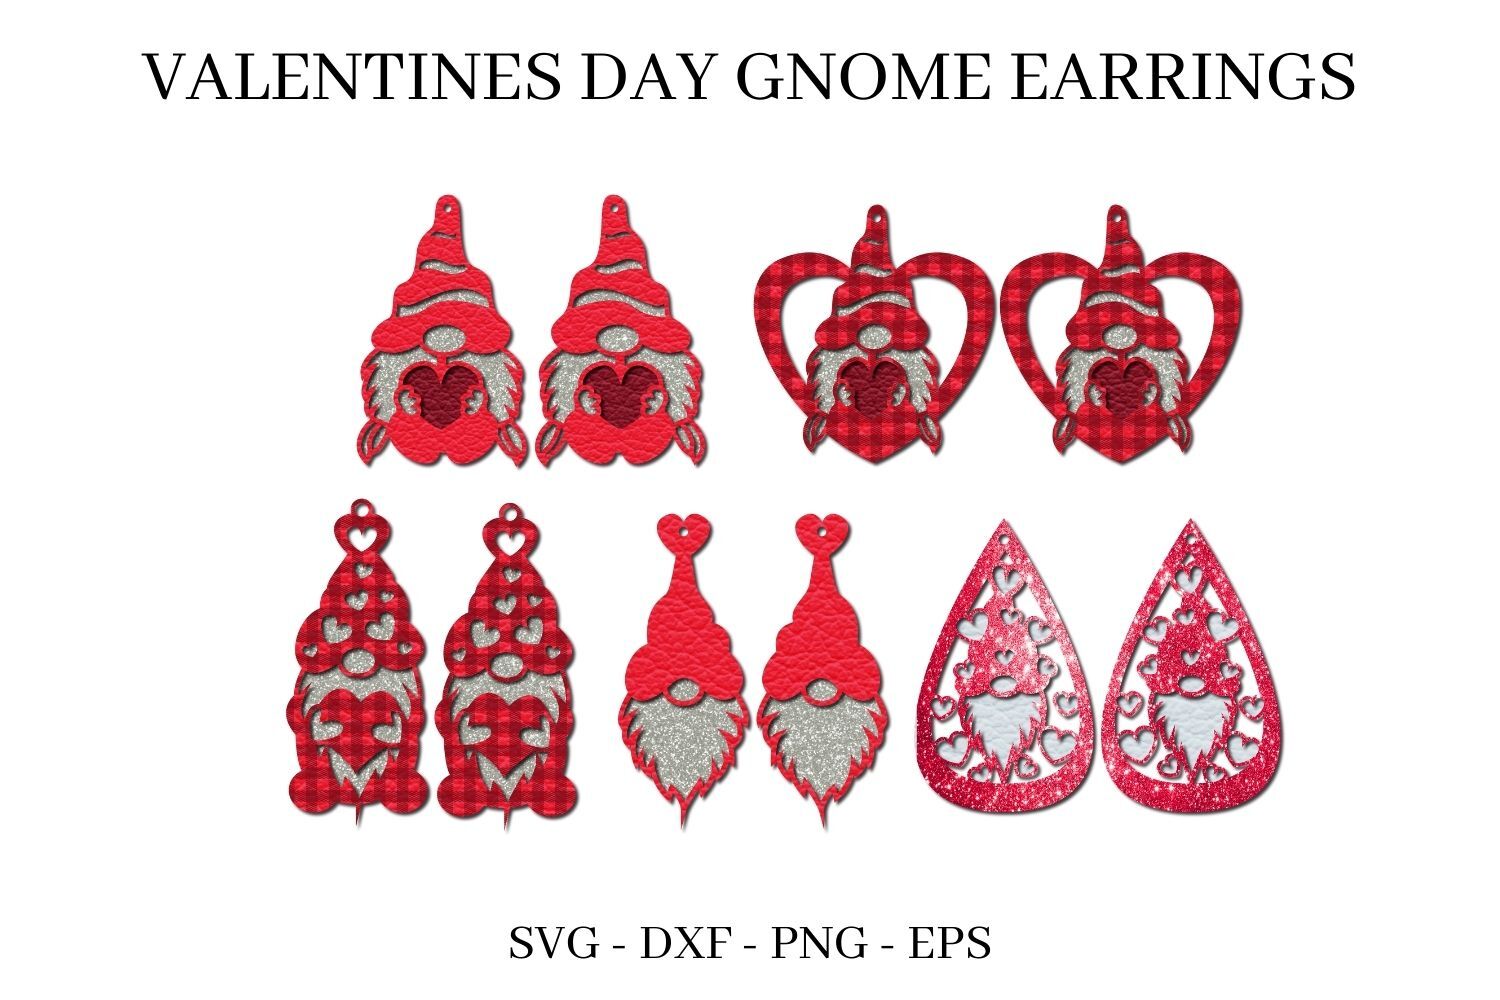 Valentines Gnome Earrings Bundle Graphic by Taita Digital